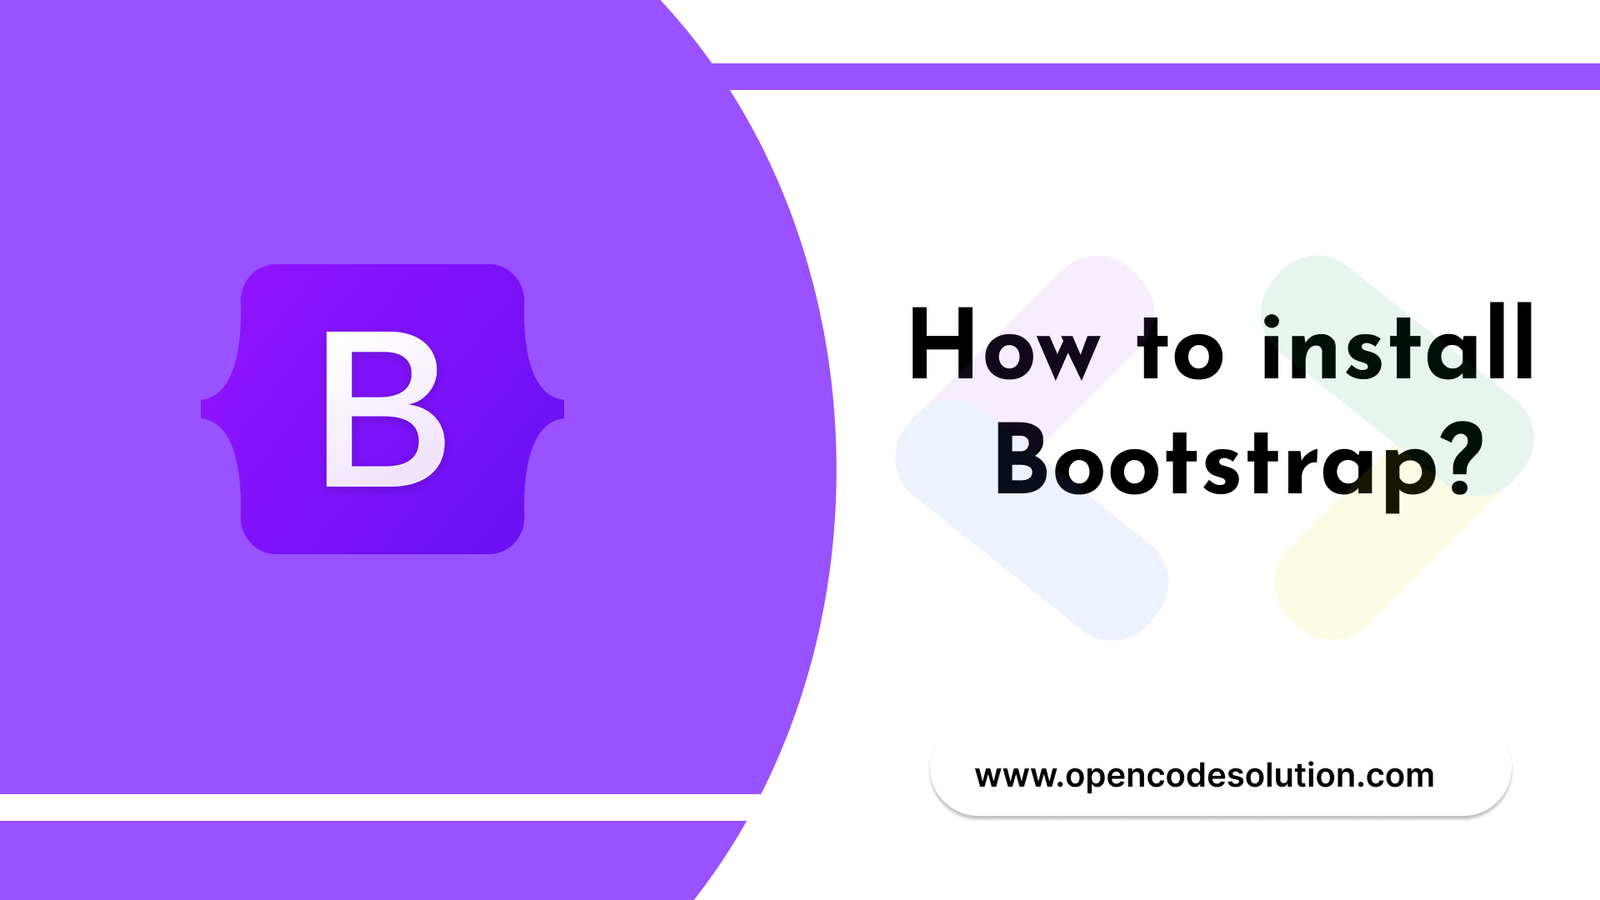 How to install Bootstrap?